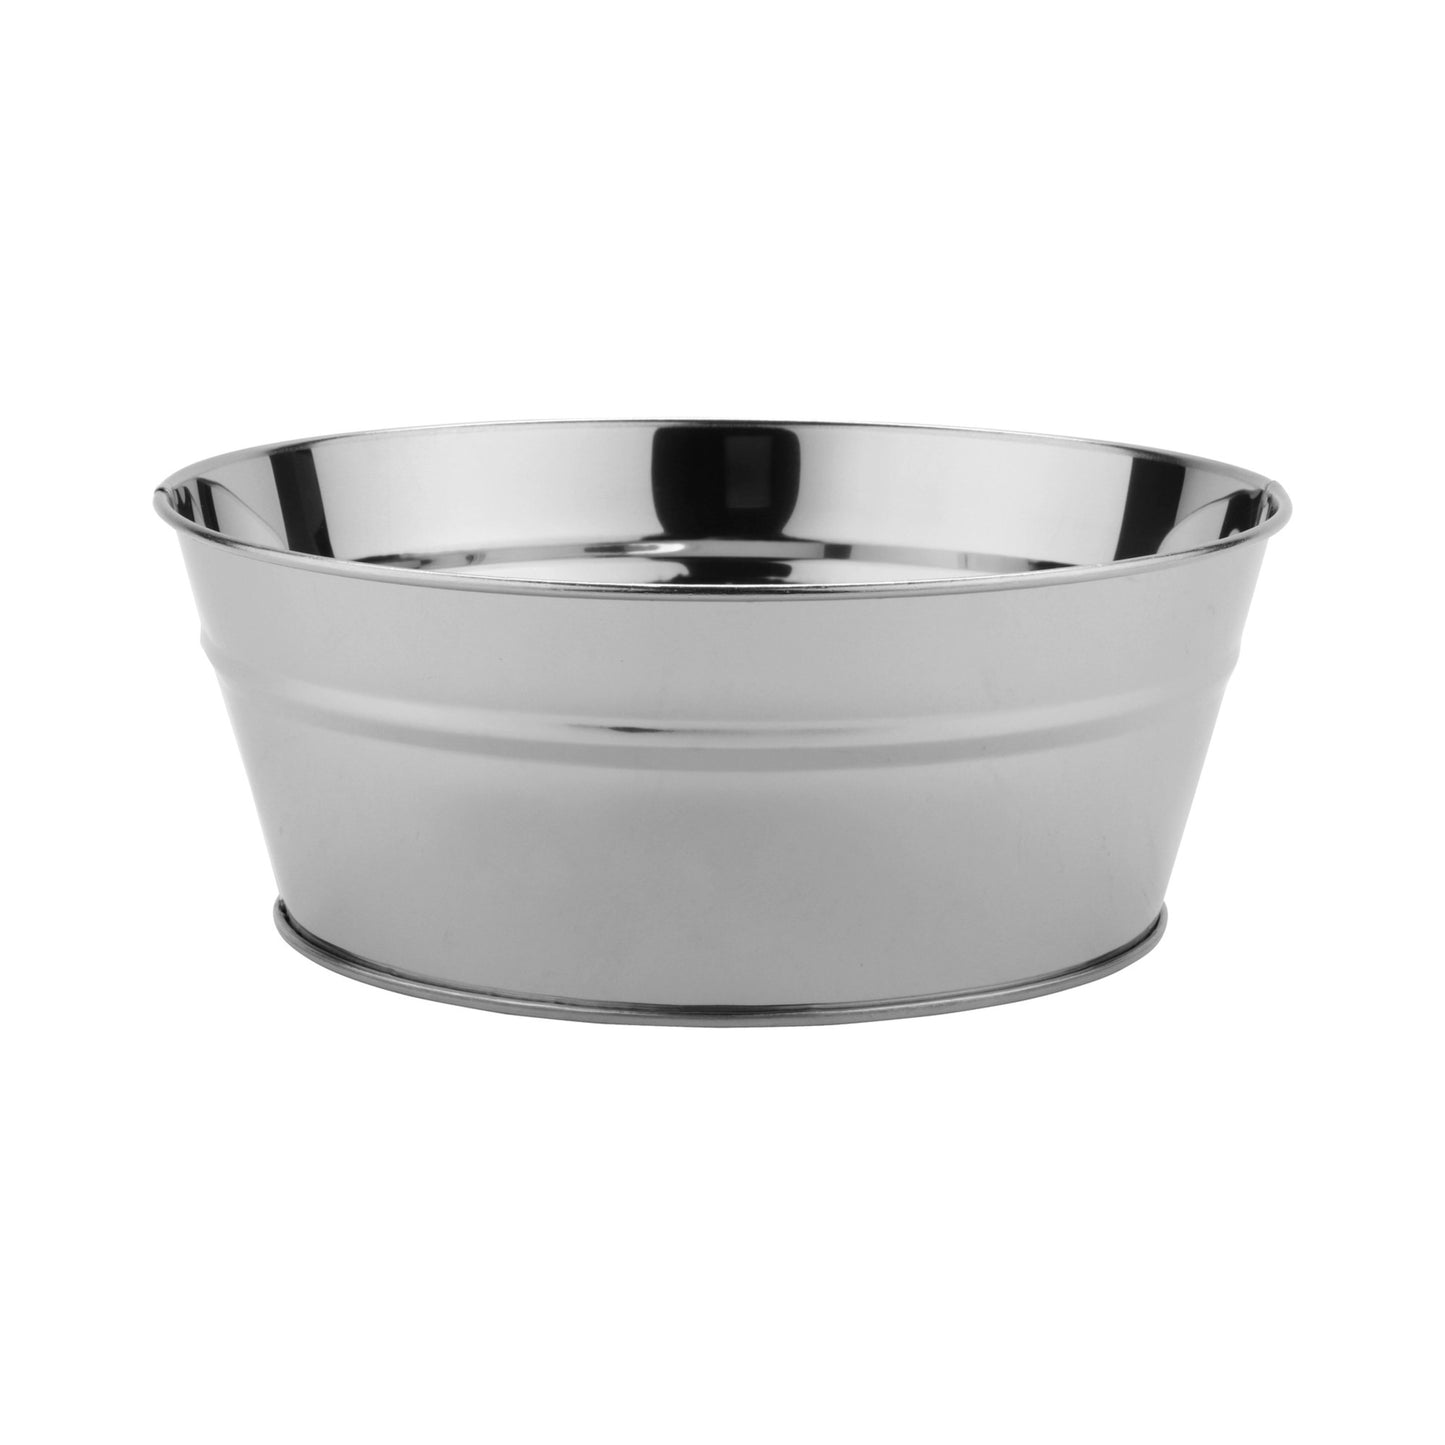 8" Dia. Stainless Steel Serving Tray, 3" deep